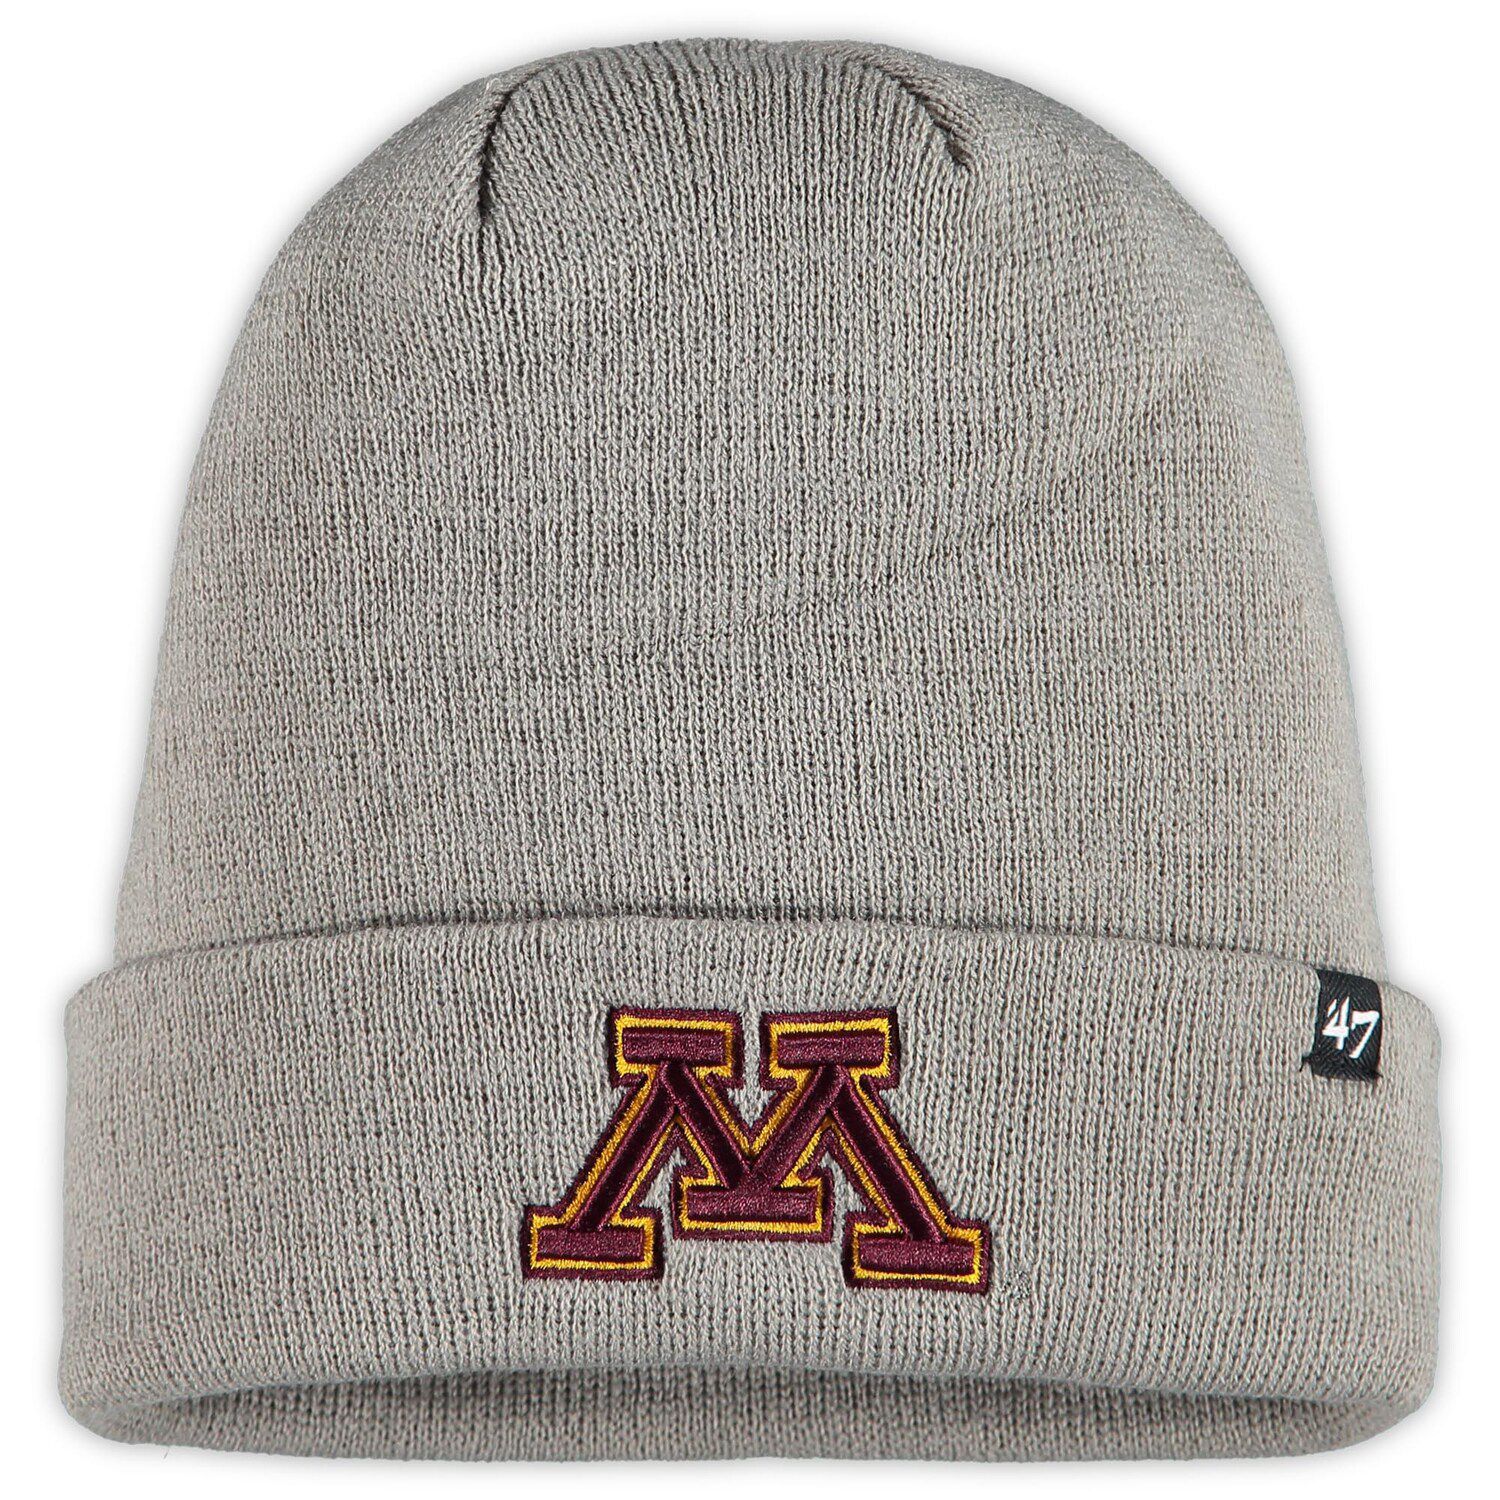 Image for Unbranded Men's '47 Gray Minnesota Golden Gophers Raised Cuffed Knit Hat at Kohl's.